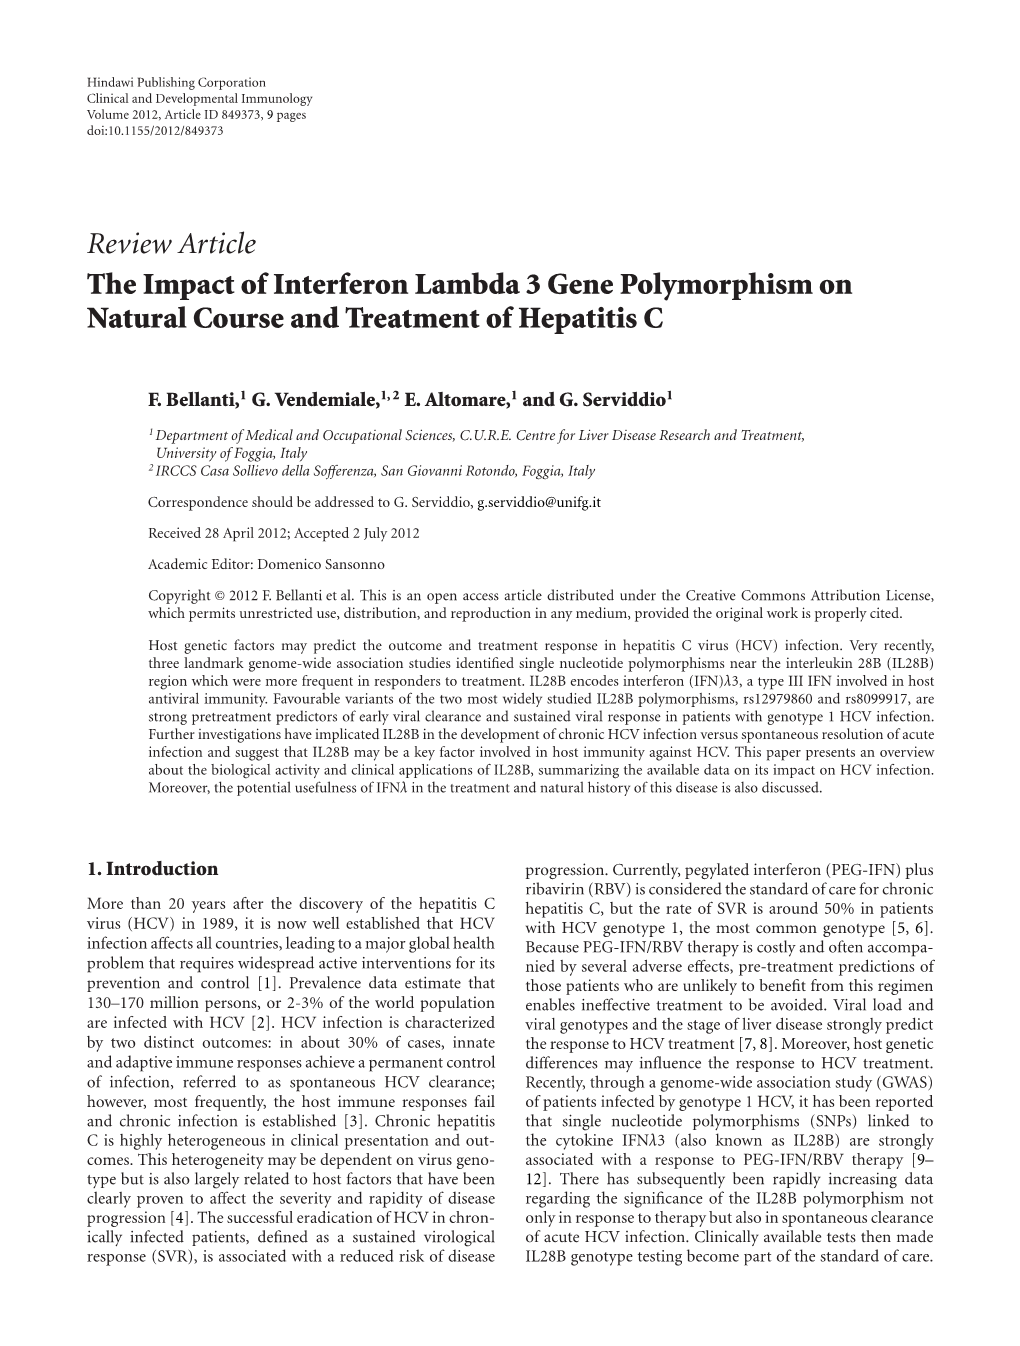 The Impact of Interferon Lambda 3 Gene Polymorphism on Natural Course and Treatment of Hepatitis C